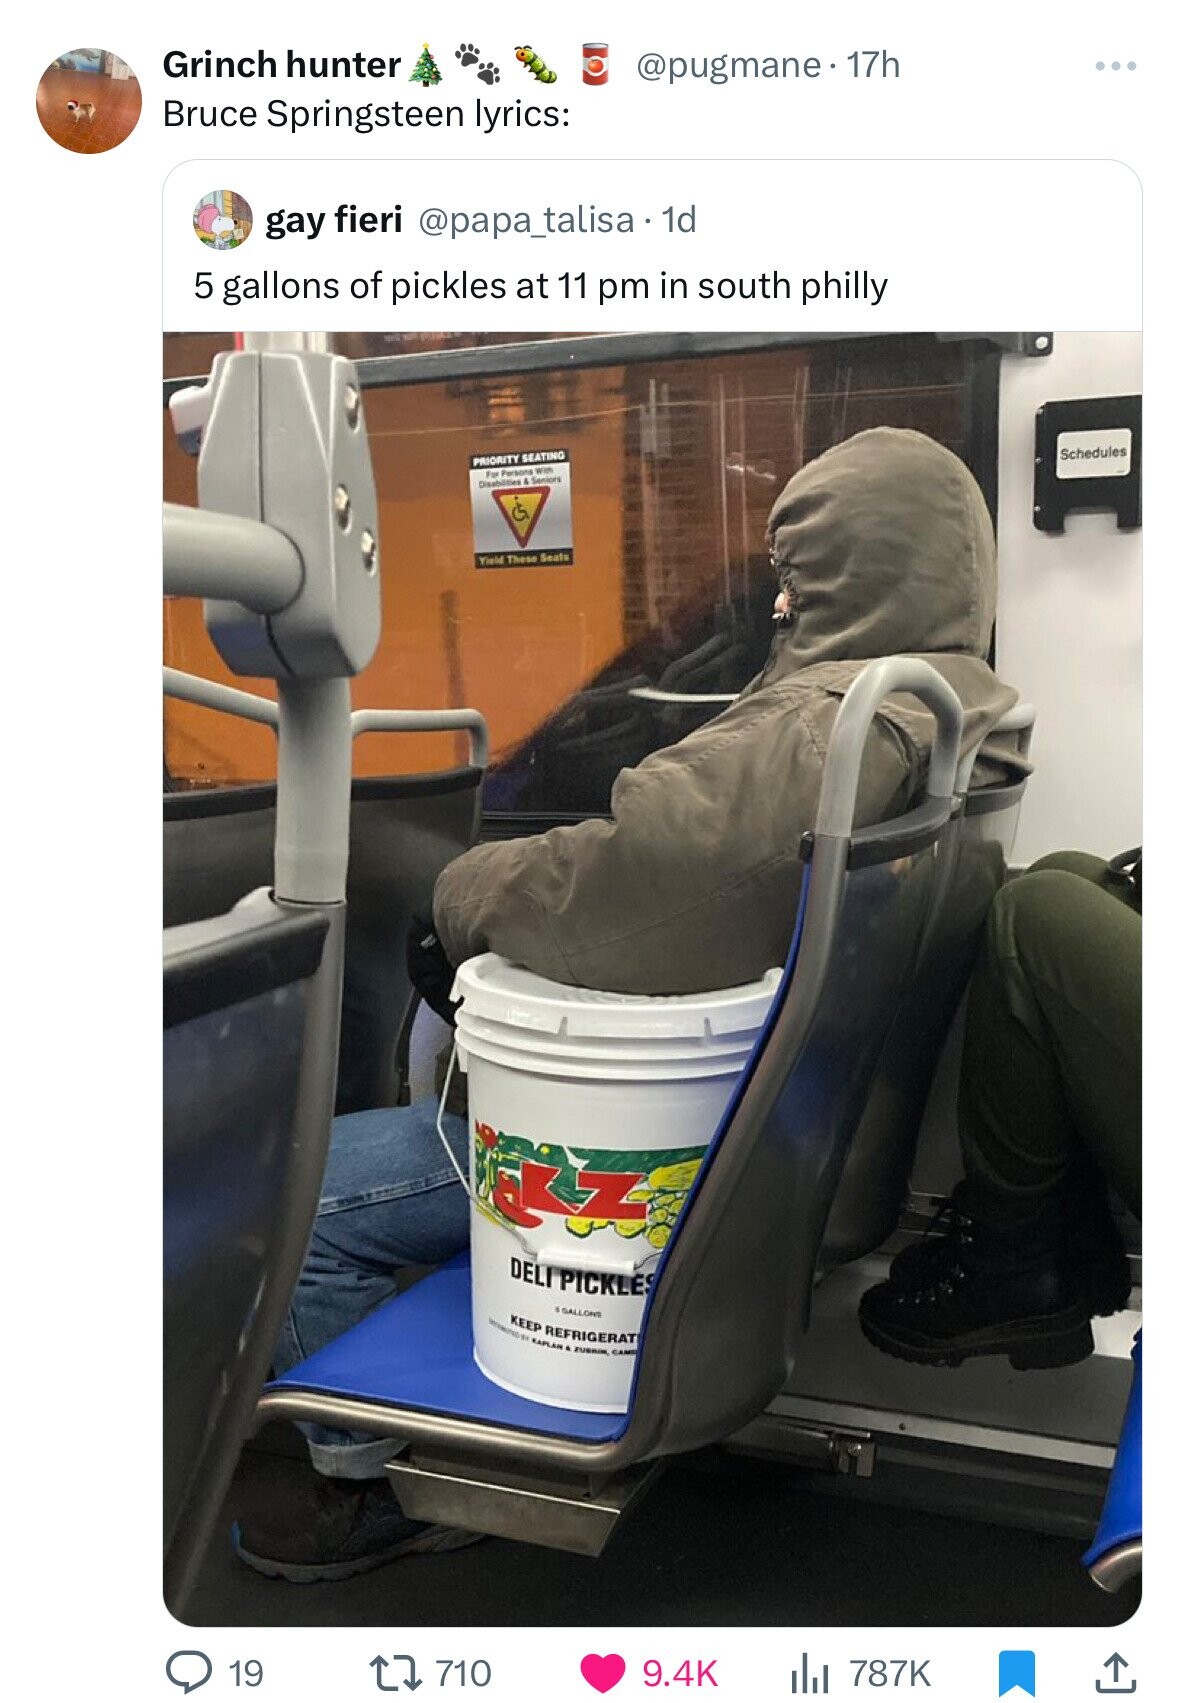 car - Grinch hunter Bruce Springsteen lyrics gay fieri 1d 5 gallons of pickles at 11 pm in south philly 19 Priority Seating For Persons With Disabilities & Seniors Yield These Seats . 17h 710 . Deli Pickles Gallons Keep Refrigerat Kaplar & Zubrin, Came il